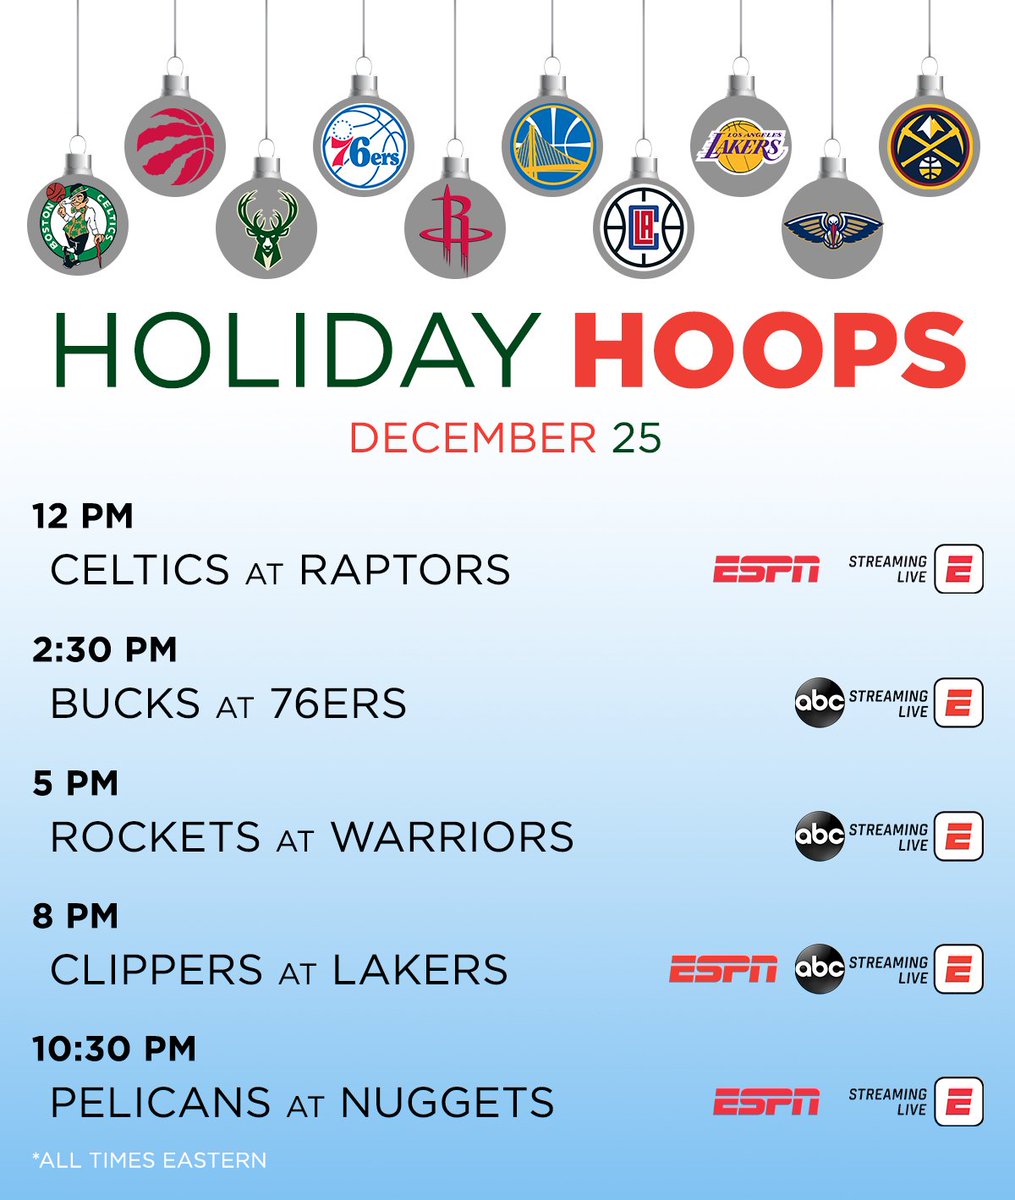 nba christmas day schedule 2020 Espn Pr On Twitter Attn Nbatwitter The Nba Christmas Day Tradition Continues On Espn And Abc With 5 Blockbuster Games Across Both Networks The Full 2019 2020 Nba On Espn Regular Season Schedule nba christmas day schedule 2020